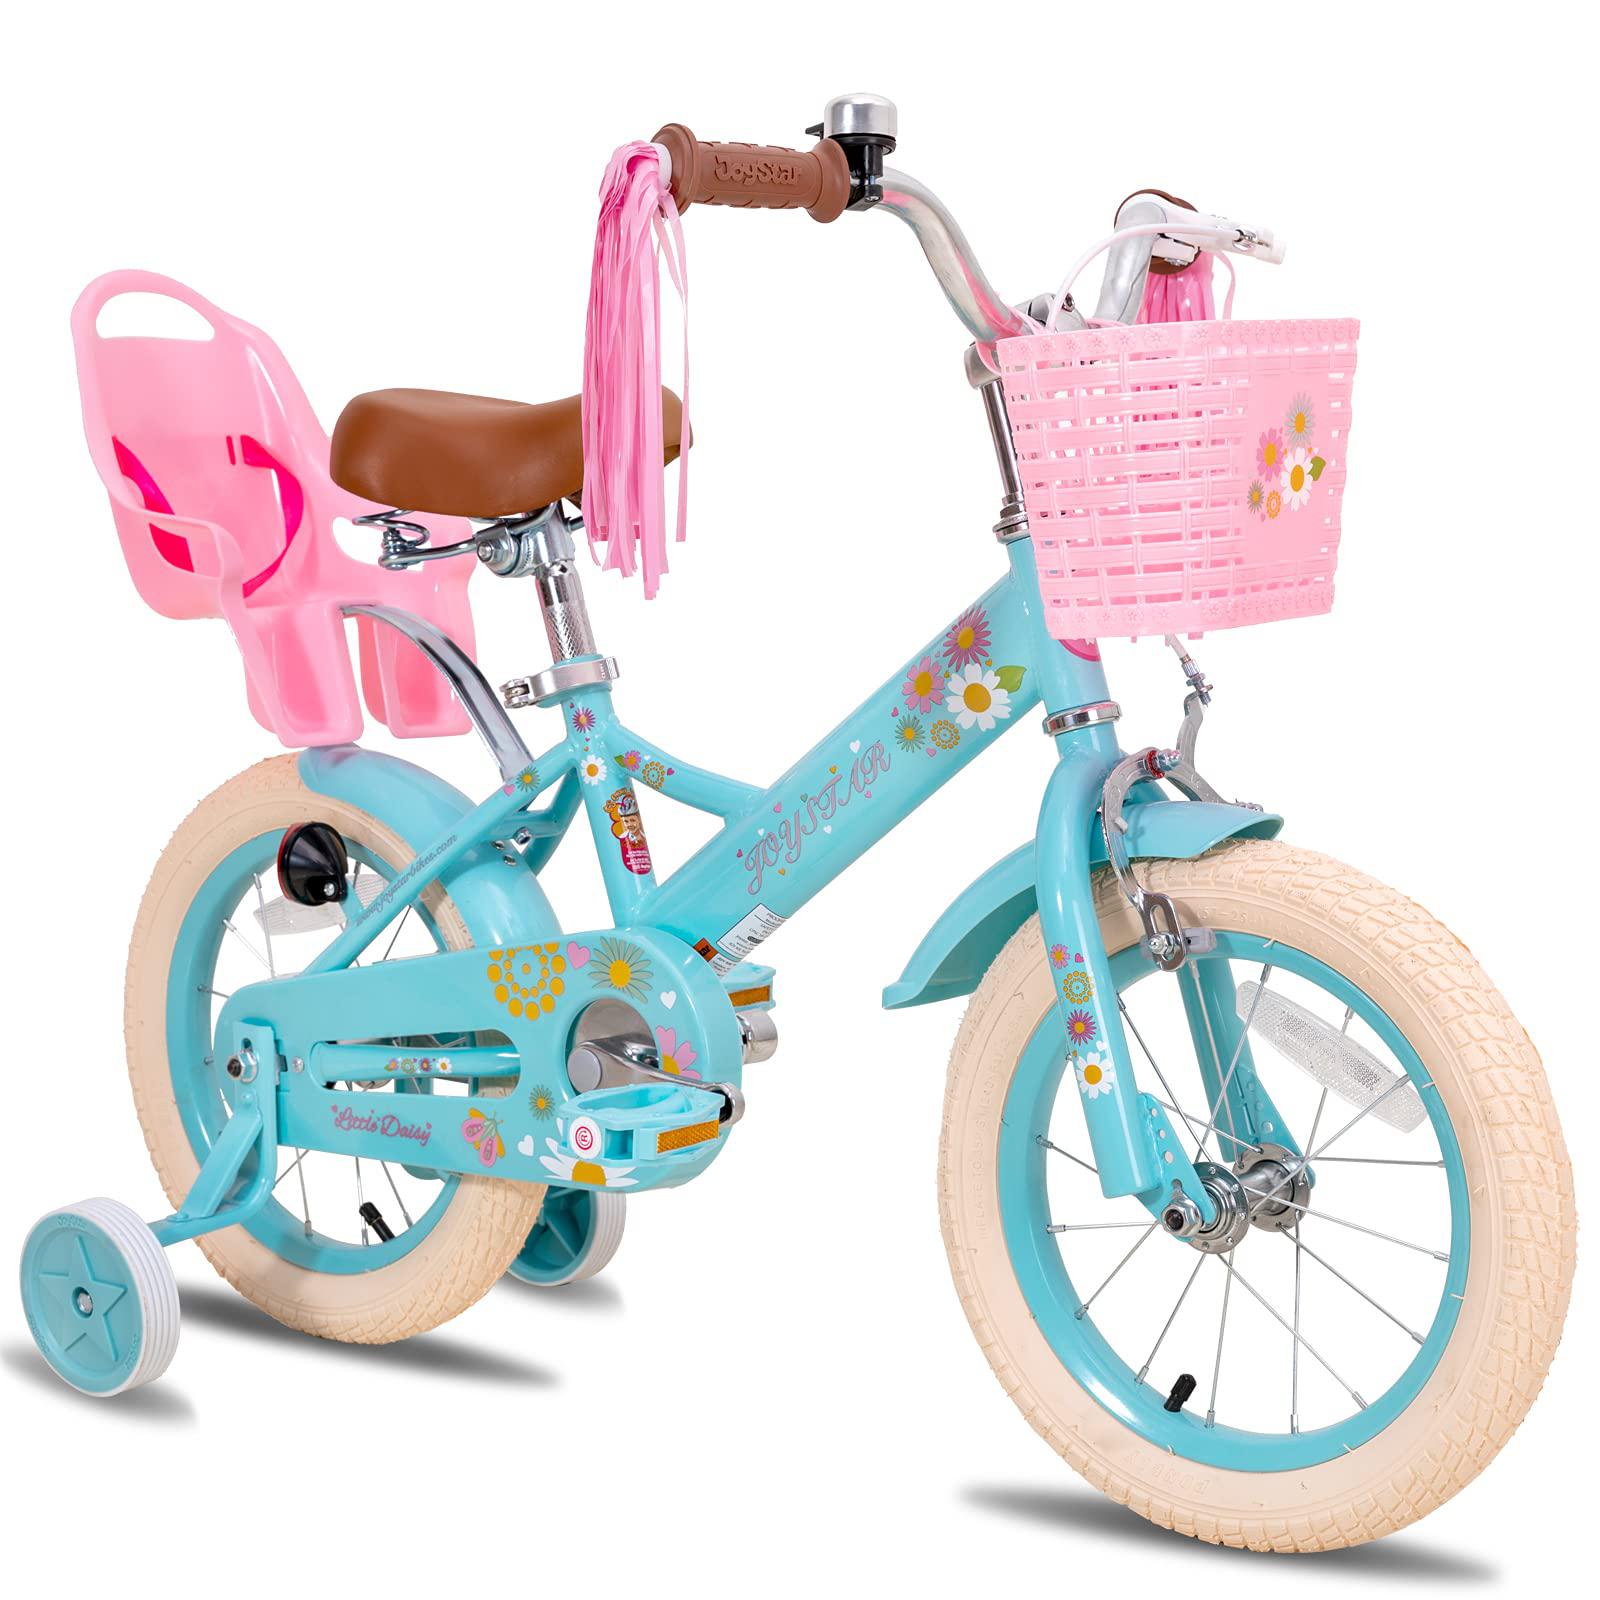 joystar little daisy 12 inch kids bike for 2 3 4 years girls toddler with training wheels princess kids bicycle with basket s